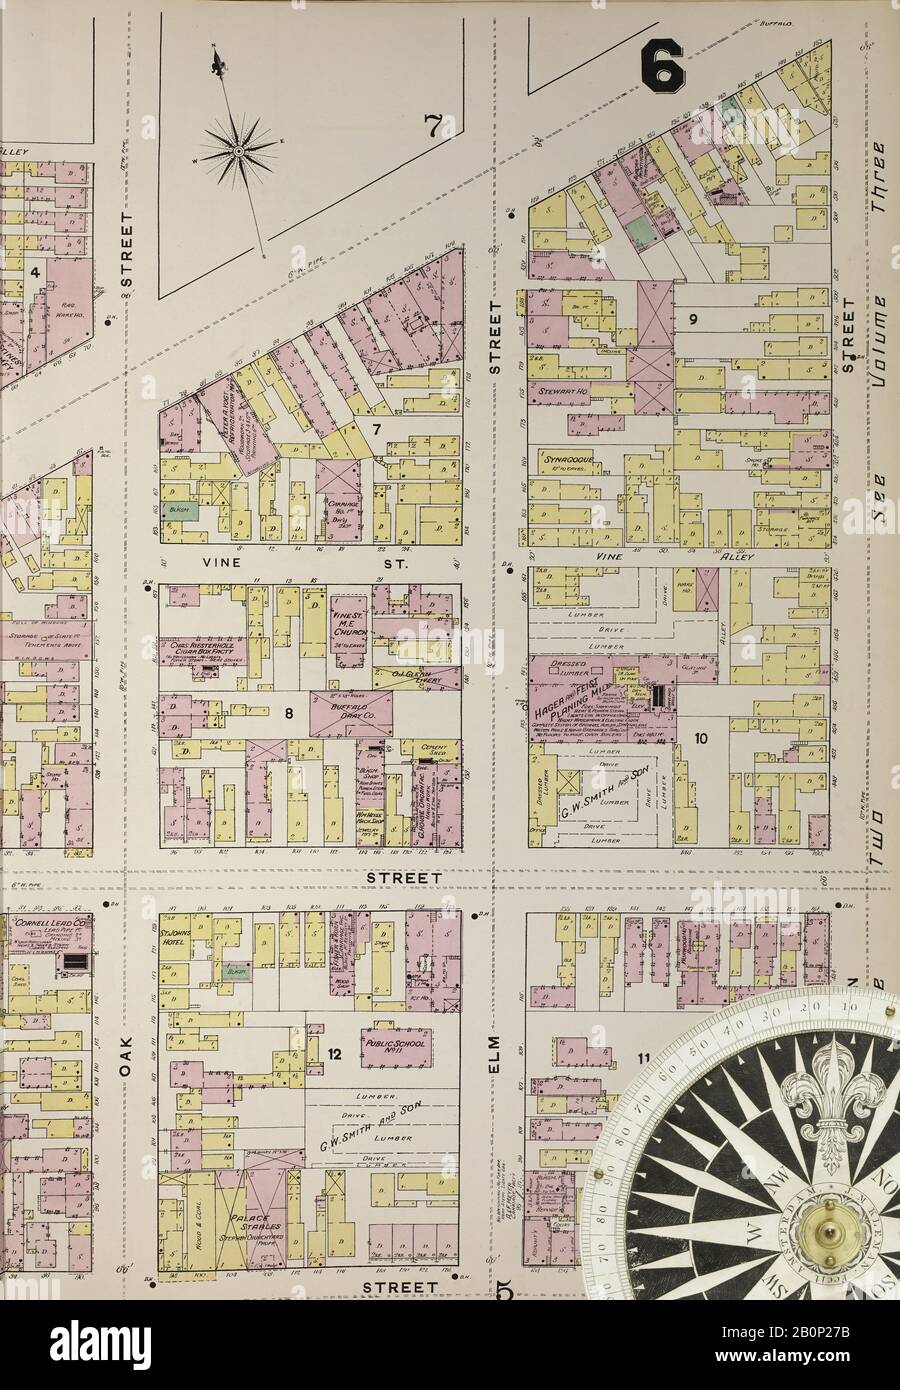 Image 16 of Sanborn Fire Insurance Map from Buffalo, Erie County, New York. 1889-1893 Vol. 1, 1889. 85 Sheet(s). Includes Map of Elevator District. Double-paged plates numbered 1-40. Bound, America, street map with a Nineteenth Century compass Stock Photo